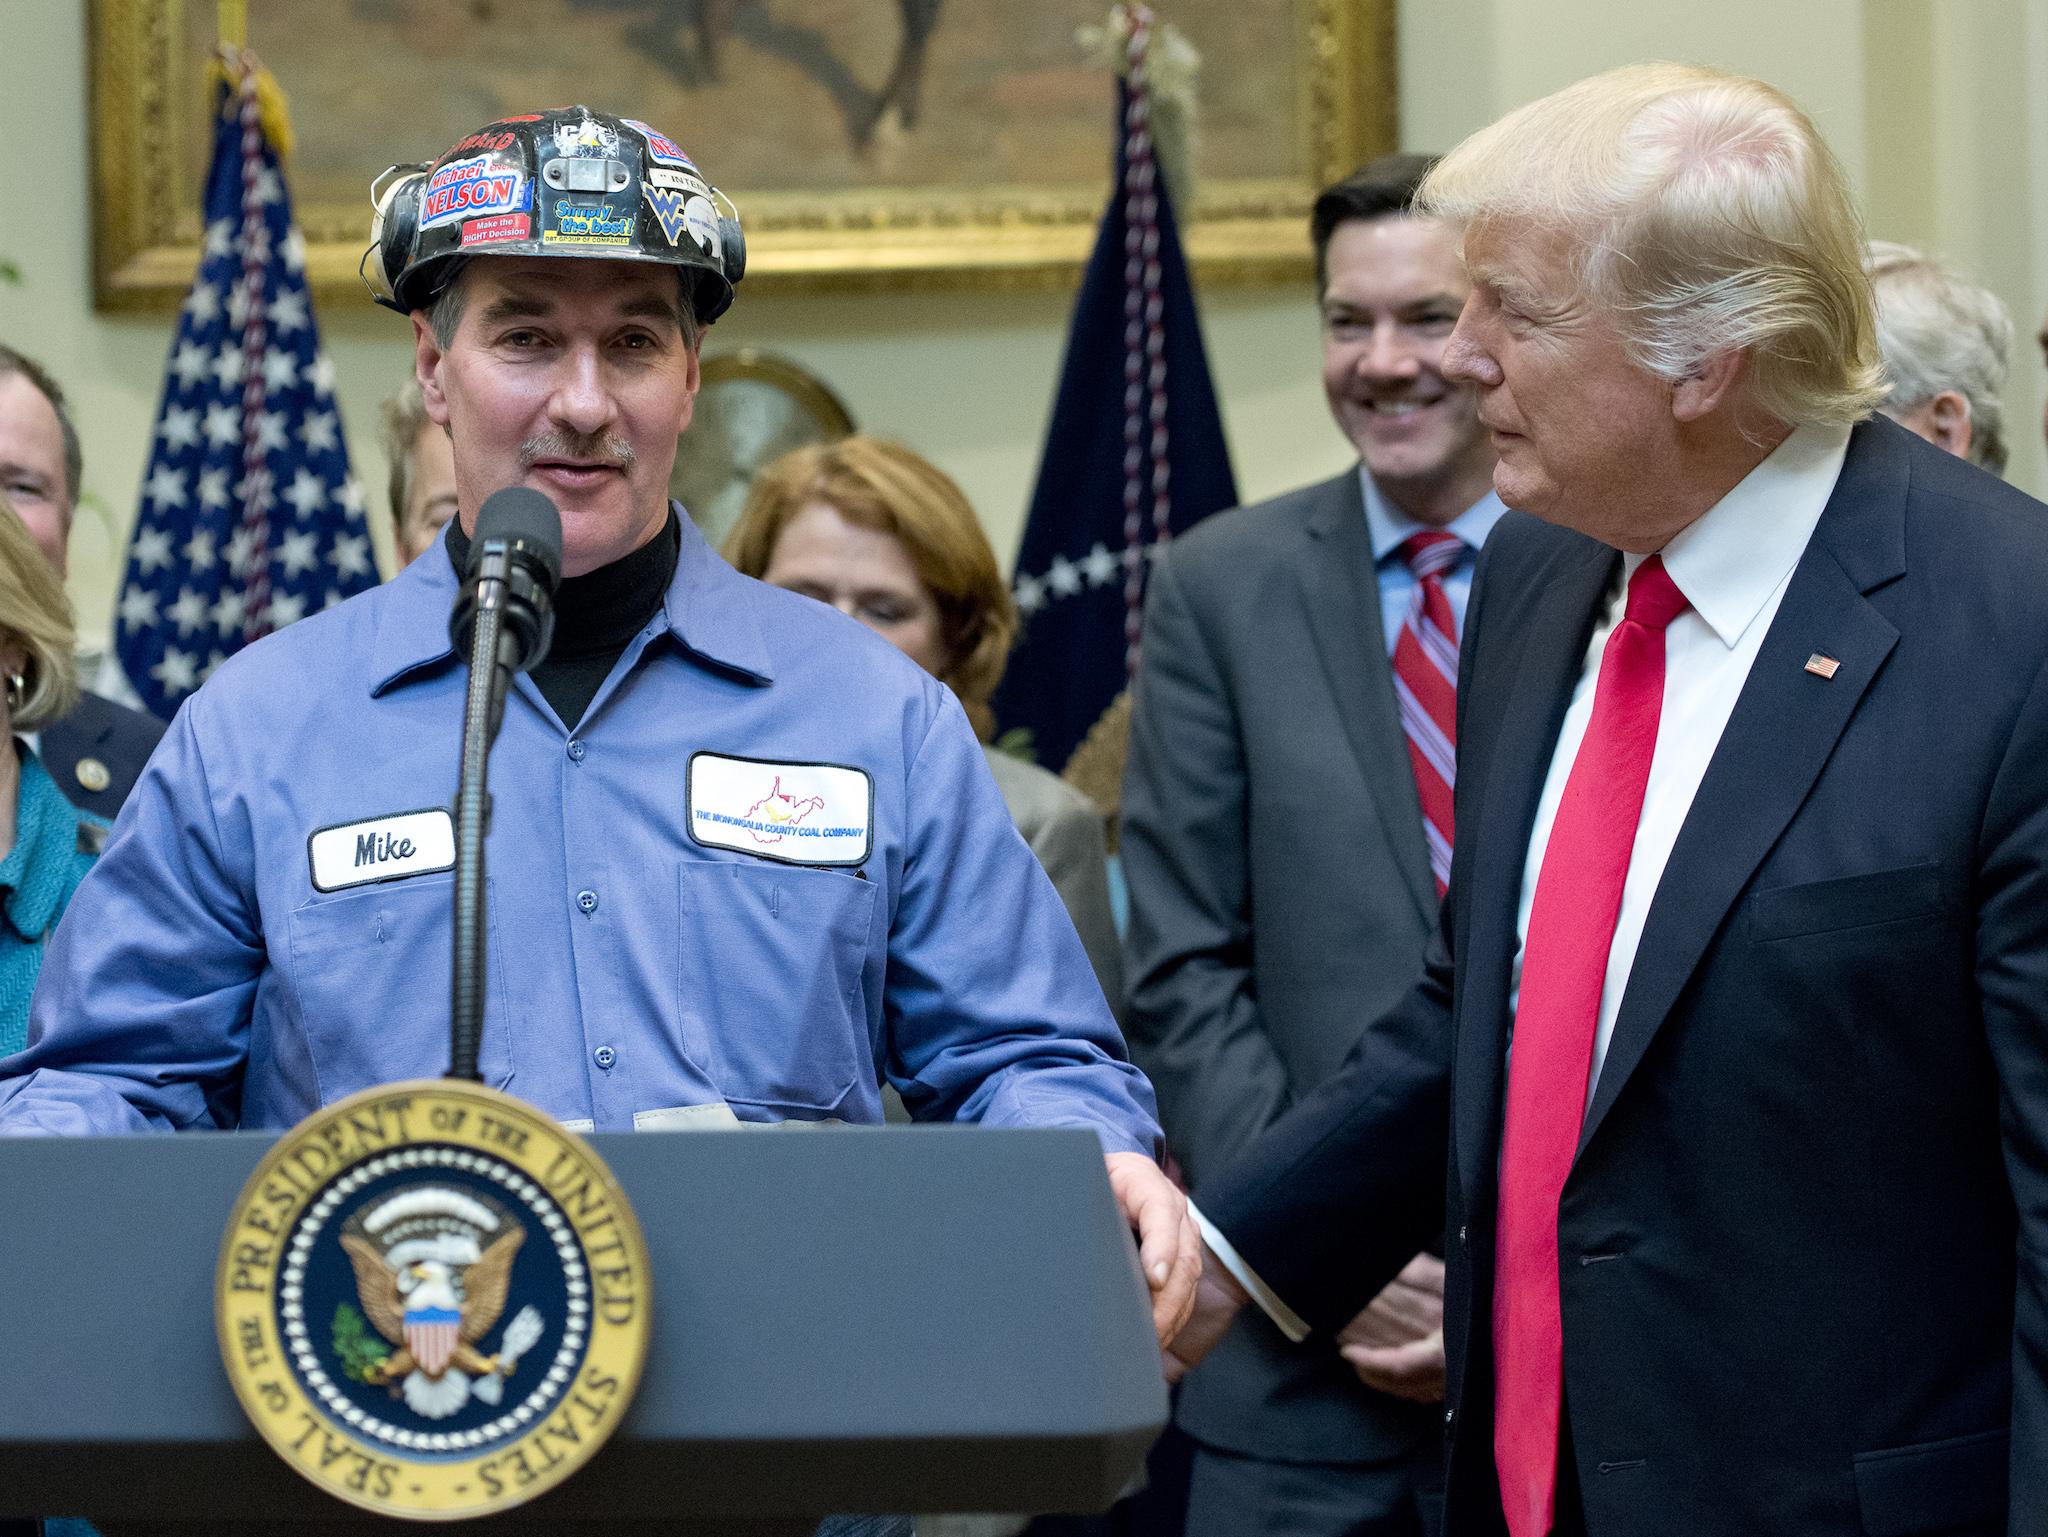 A coal miner identified only as Mike makes remarks prior to U.S. President Donald Trump signing H.J. Res. 38, disapproving the rule submitted by the US Department of the Interior known as the Stream Protection Rule in the Roosevelt Room of the White House on February 16, 2017 in Washington, DC